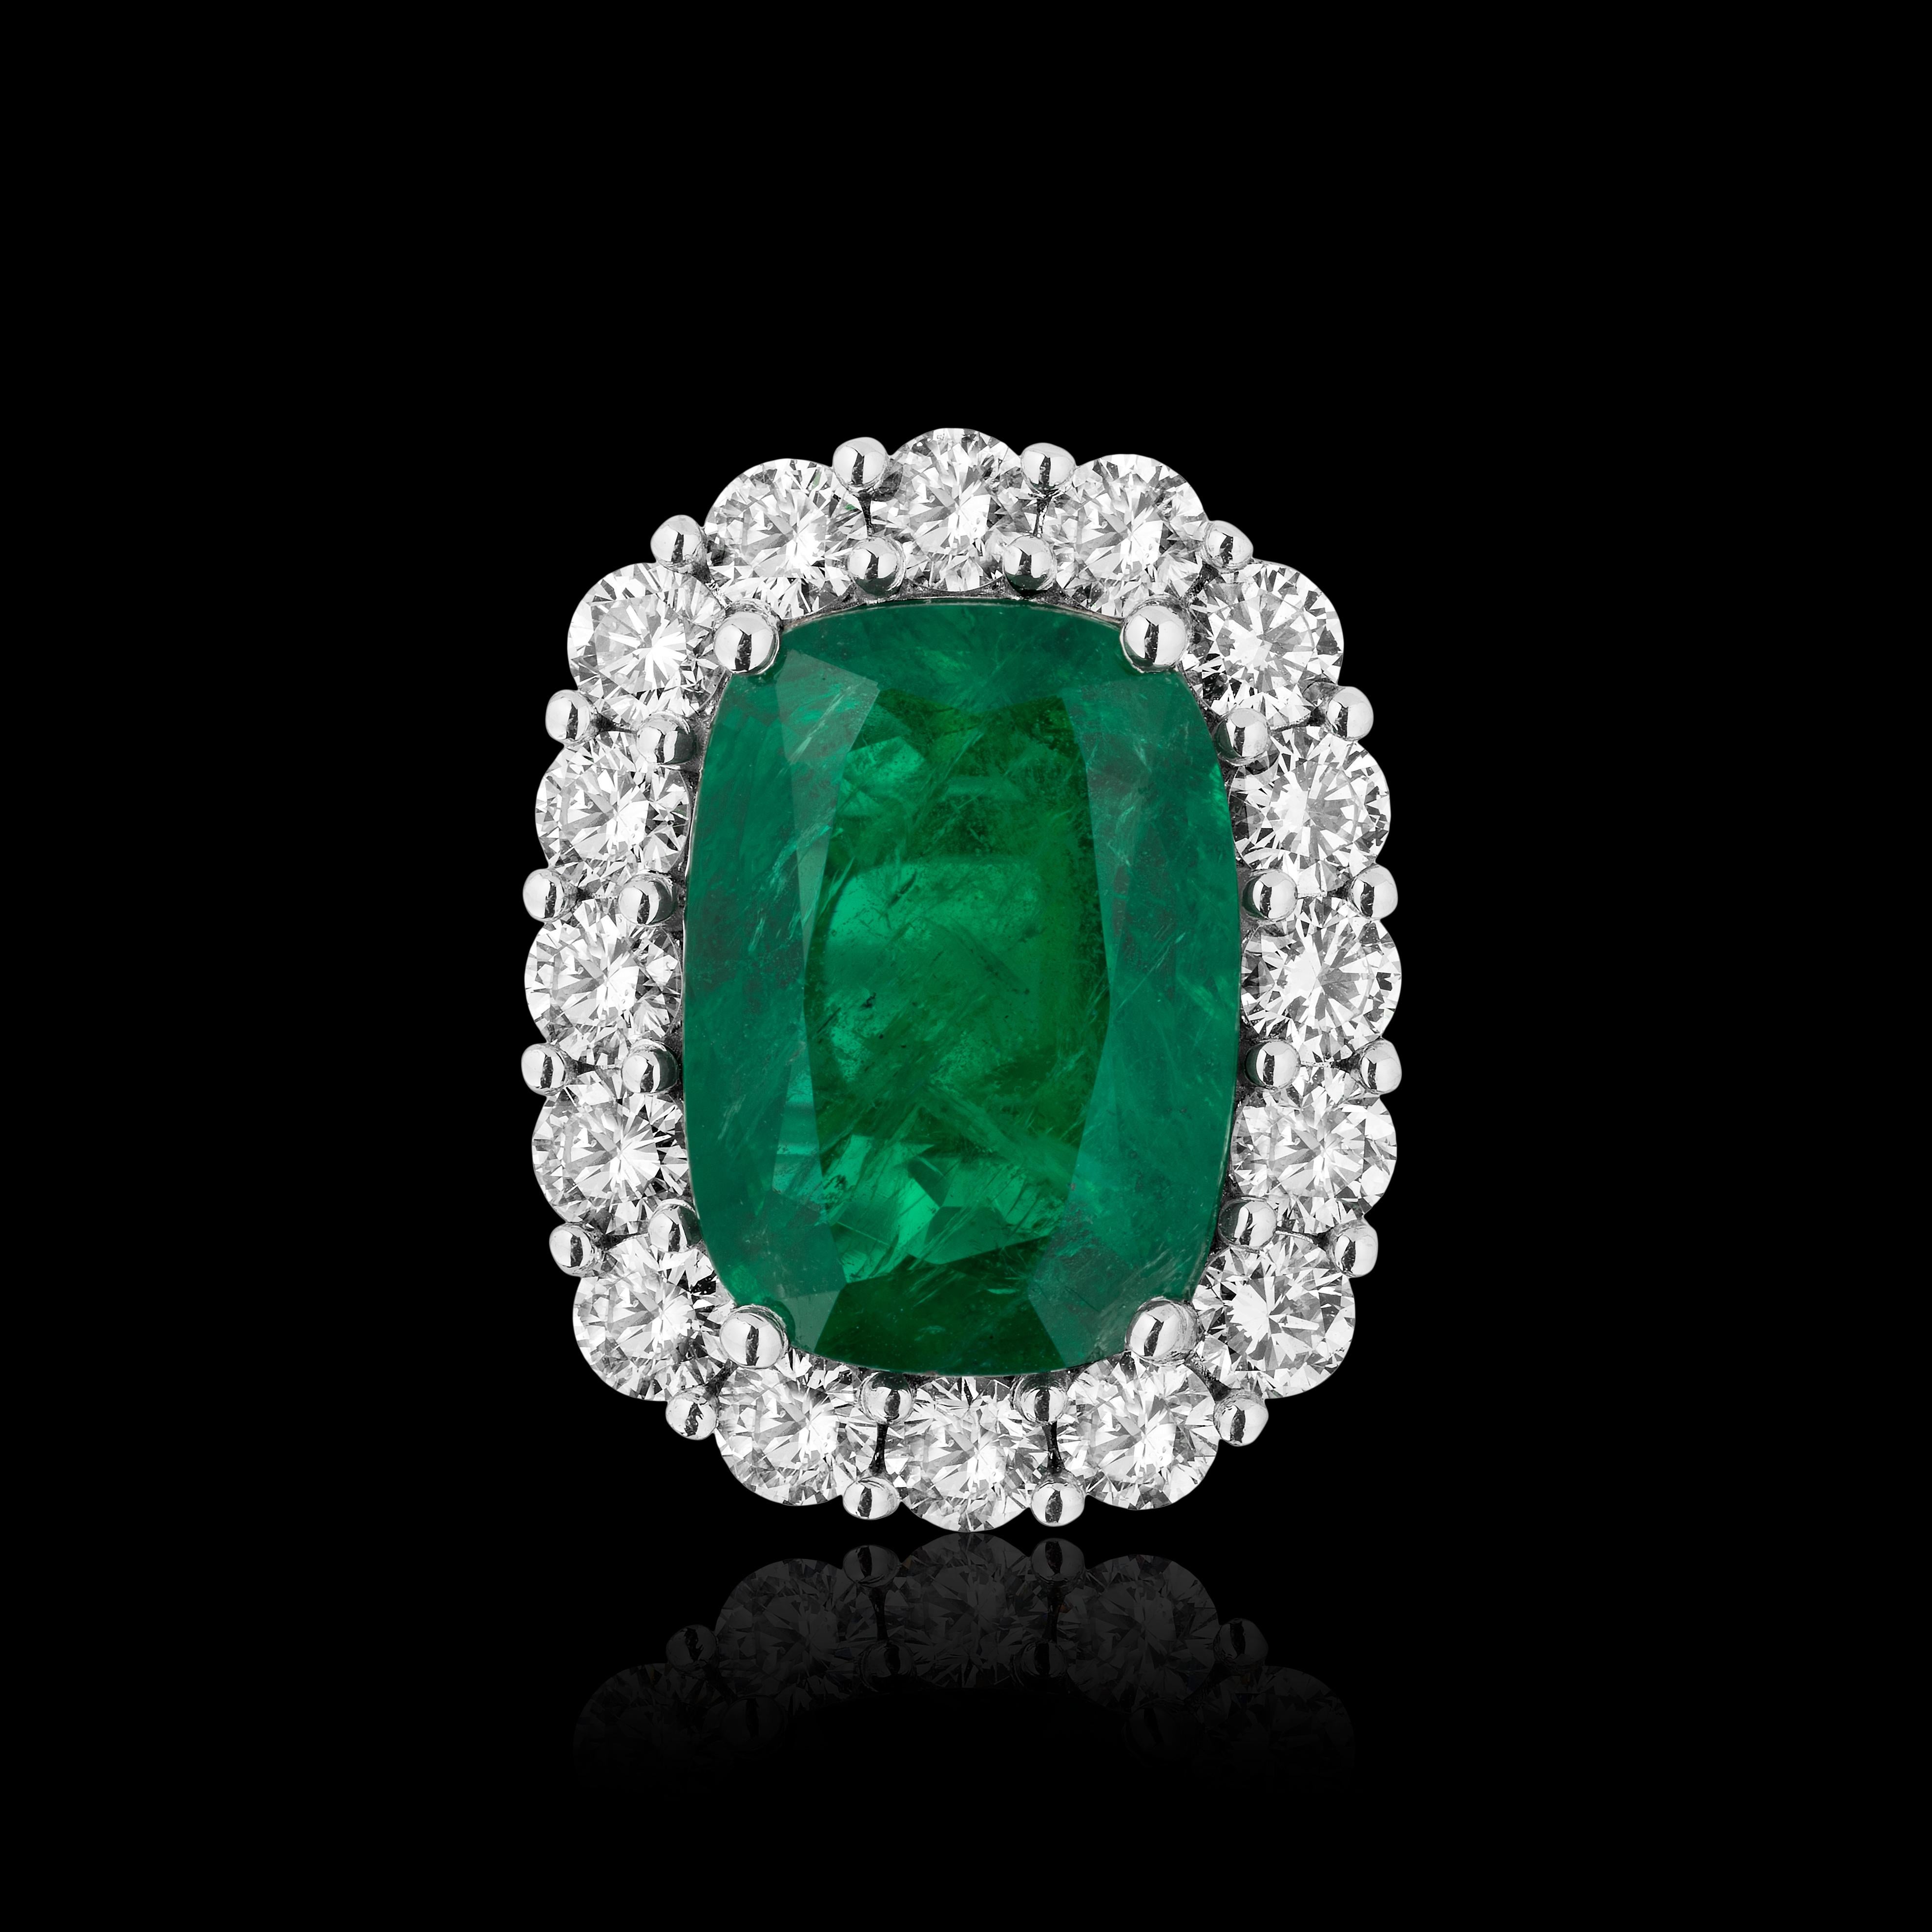 Cushion Cut Andreoli 10.04 Carat Emerald CDC Certified Diamond Platinum Engagement Ring For Sale